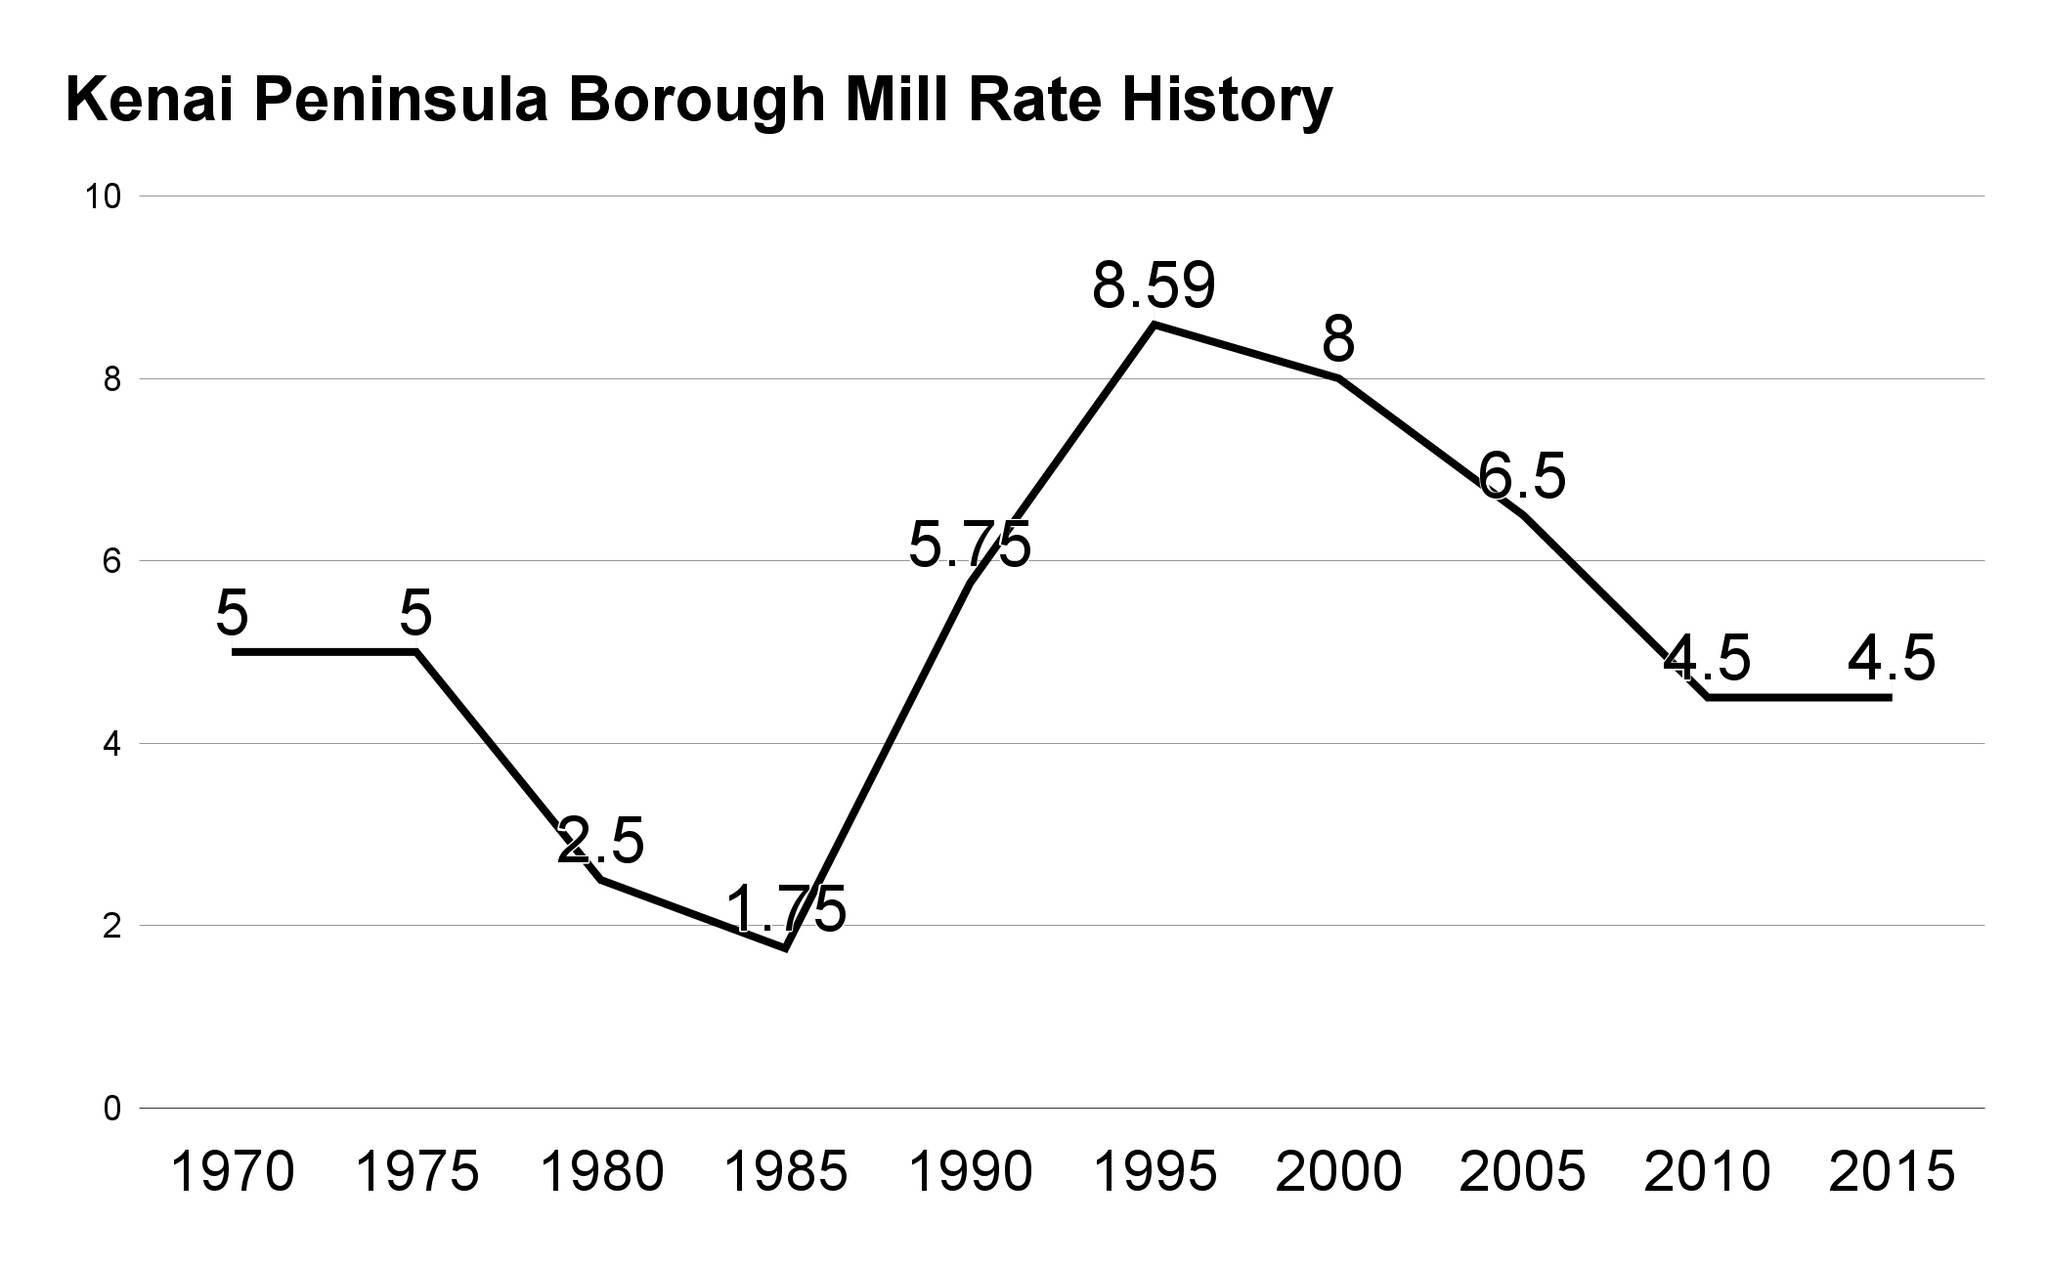 This line graph shows the changes in the Kenai Peninsula Borough property tax rate in five-year intervals since 1970 using information from a budget handout distributed during the Borough Assembly’s Tuesday, June 6, 2017 meeting.